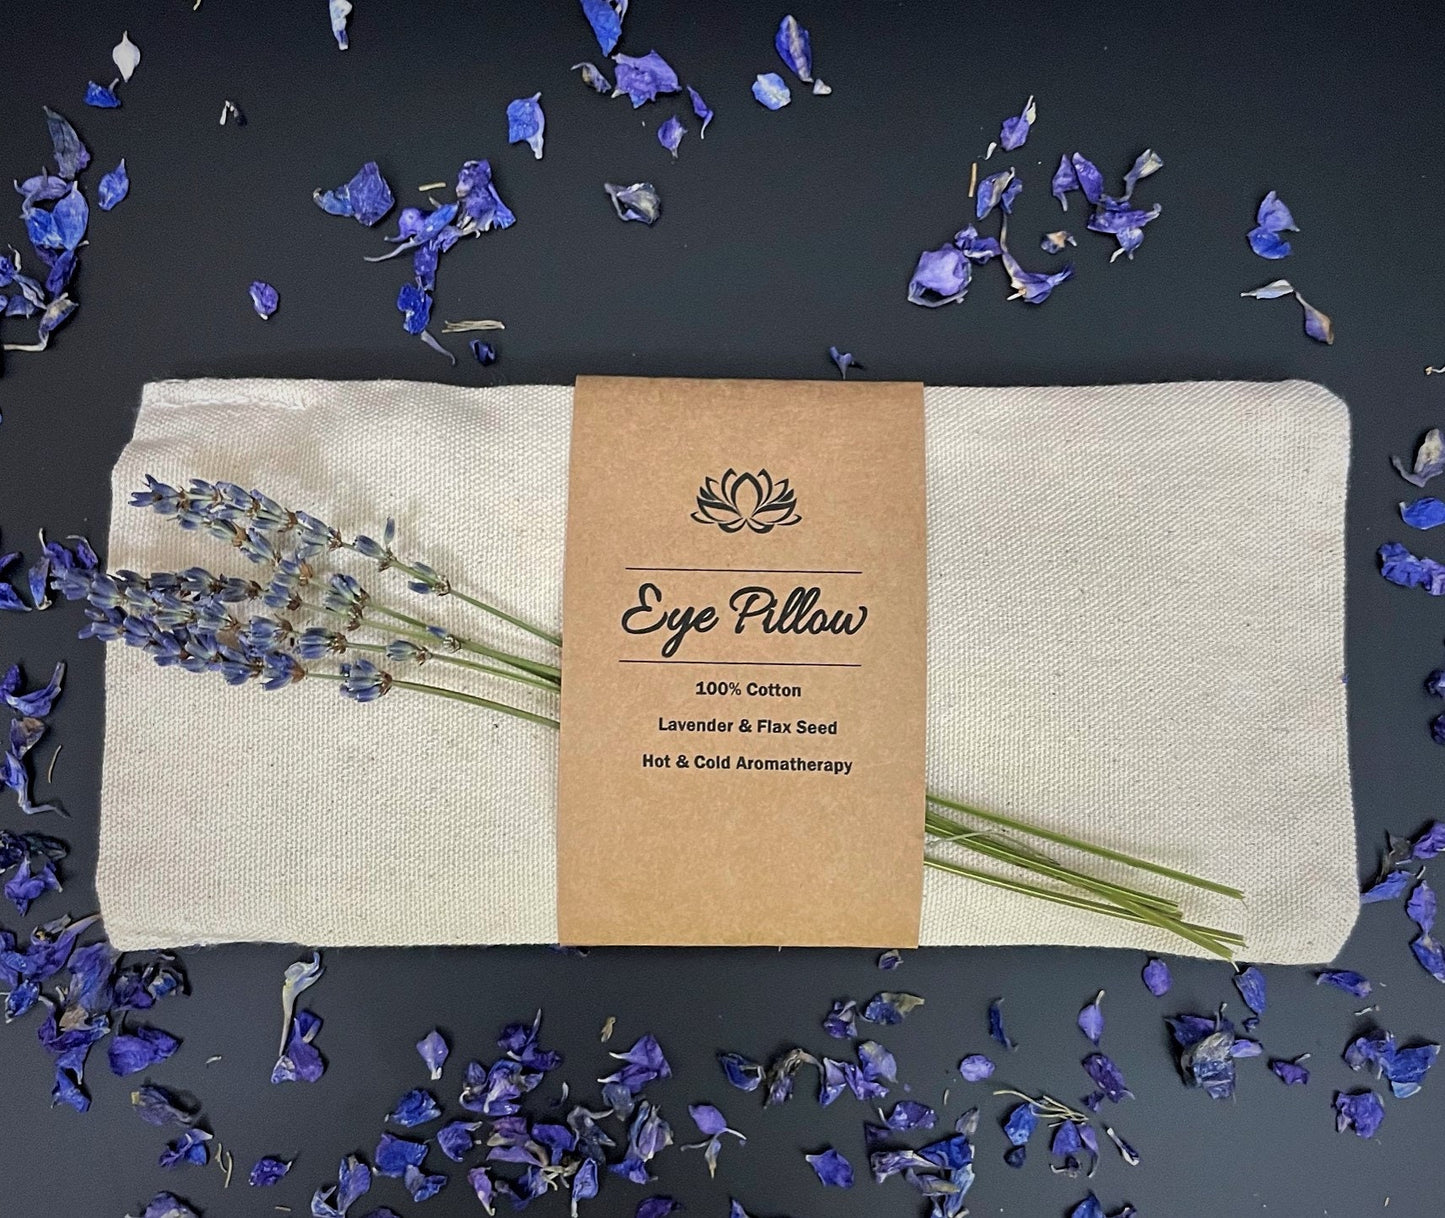 Aromatherapy Hot & Cold Lavender or Rose and Chamomile Eye Pillows,100% Cotton, Natural Lavender, Organic Flax Seed, Yoga Eye Pillow, Relax